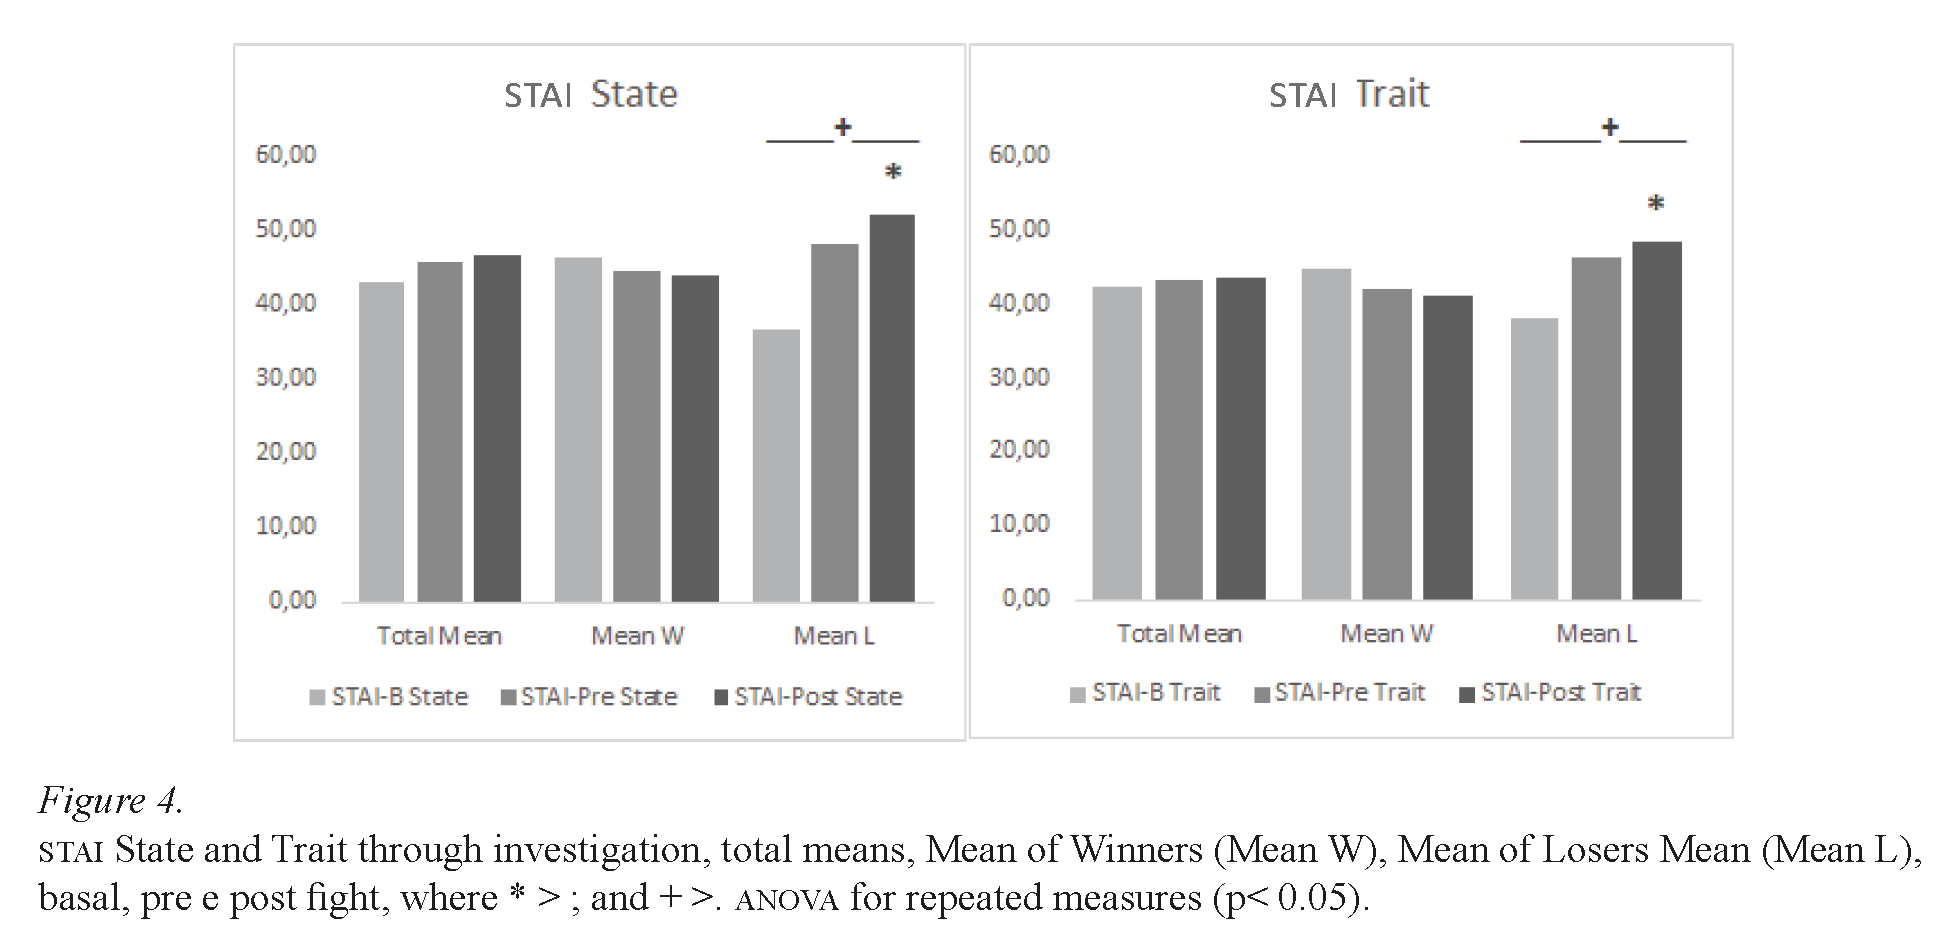 STAI State and Trait through investigation, total means, Mean of Winners (Mean W), Mean of Losers Mean (Mean L)